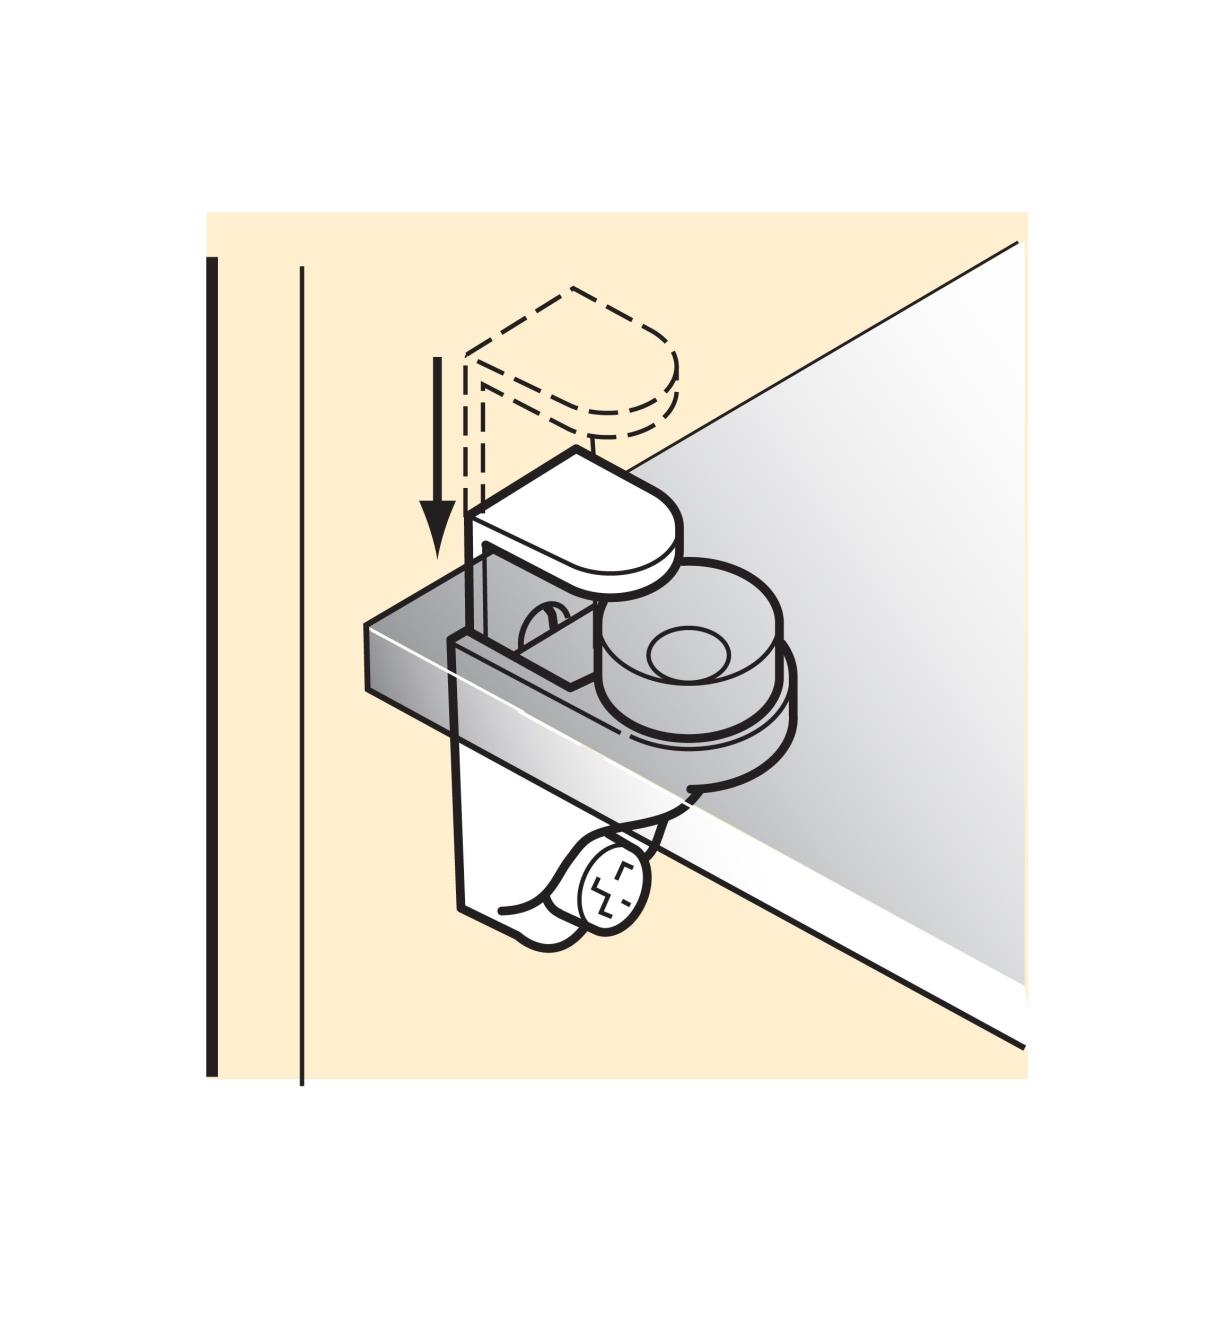 Illustration of shelf support clamping onto a glass shelf